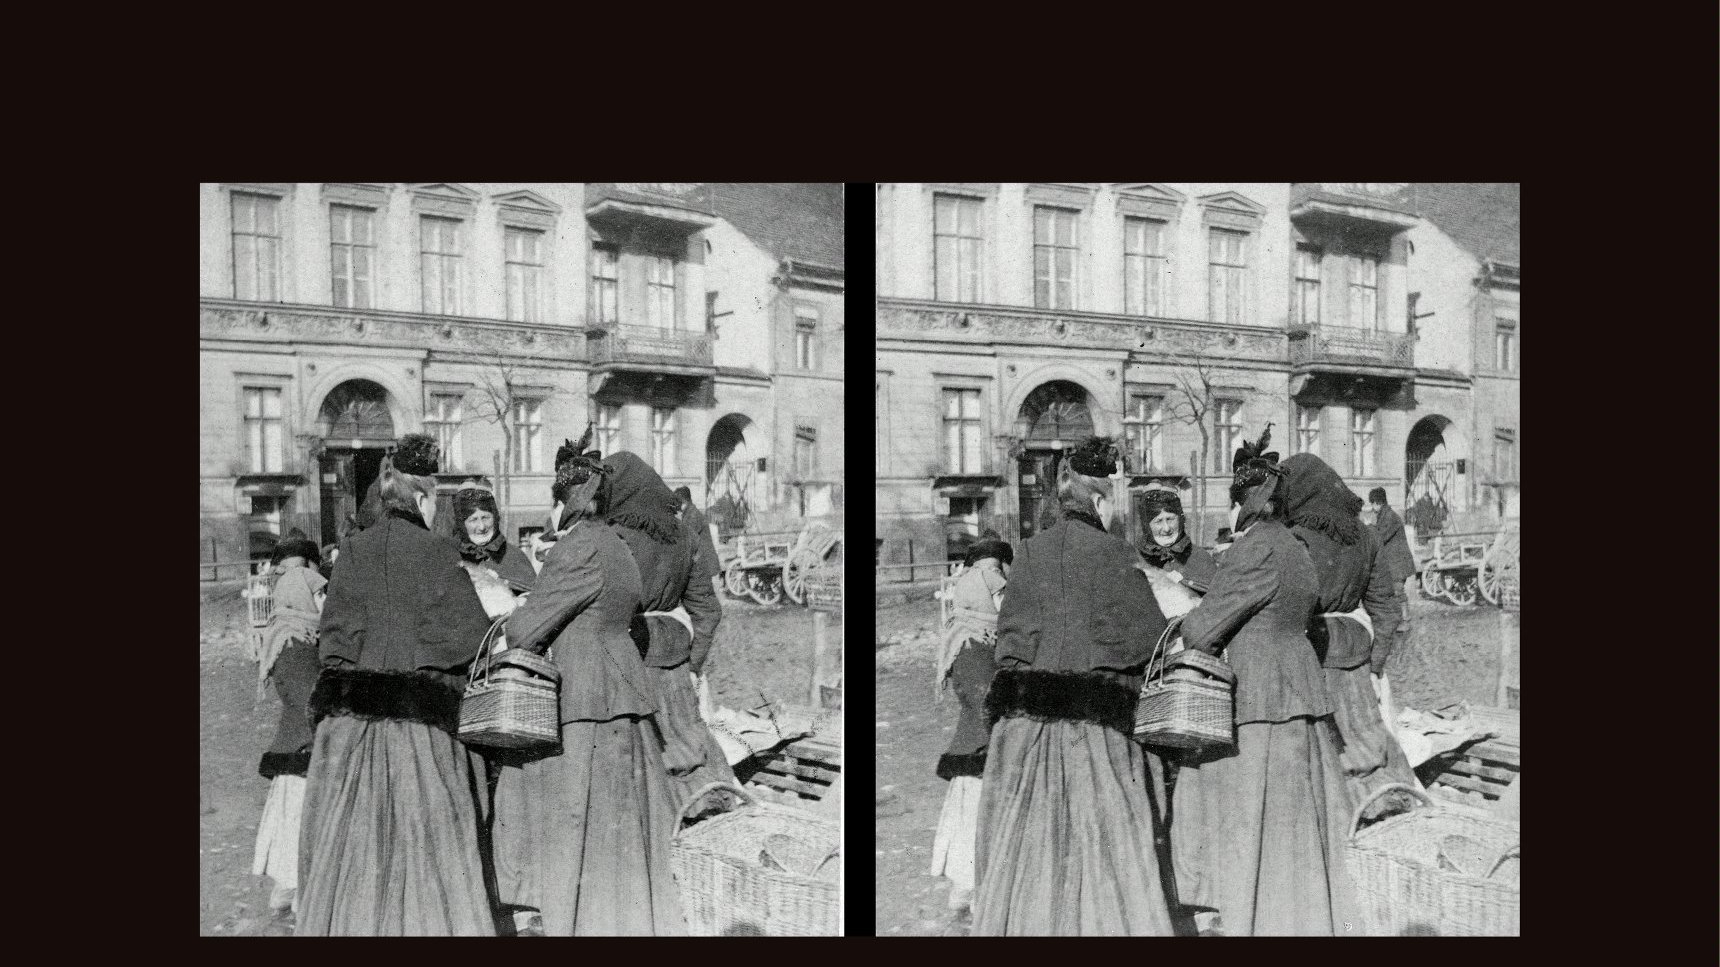 Black and white stereophotograph of a few peddler women standing together. One of them is holding a wicker basket. Two buildings as a background.